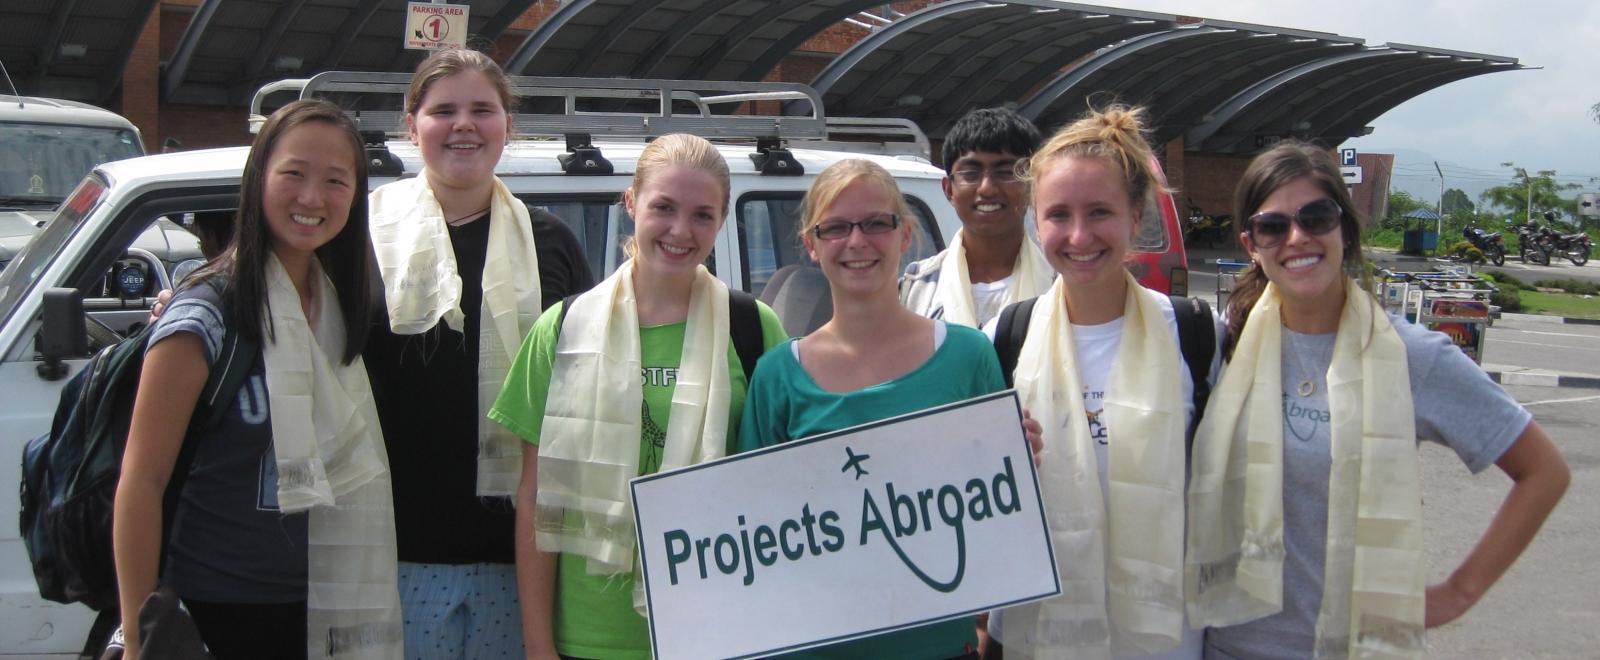 Staff arrive at the airport to welcome Projects Abroad volunteers in Nepal.